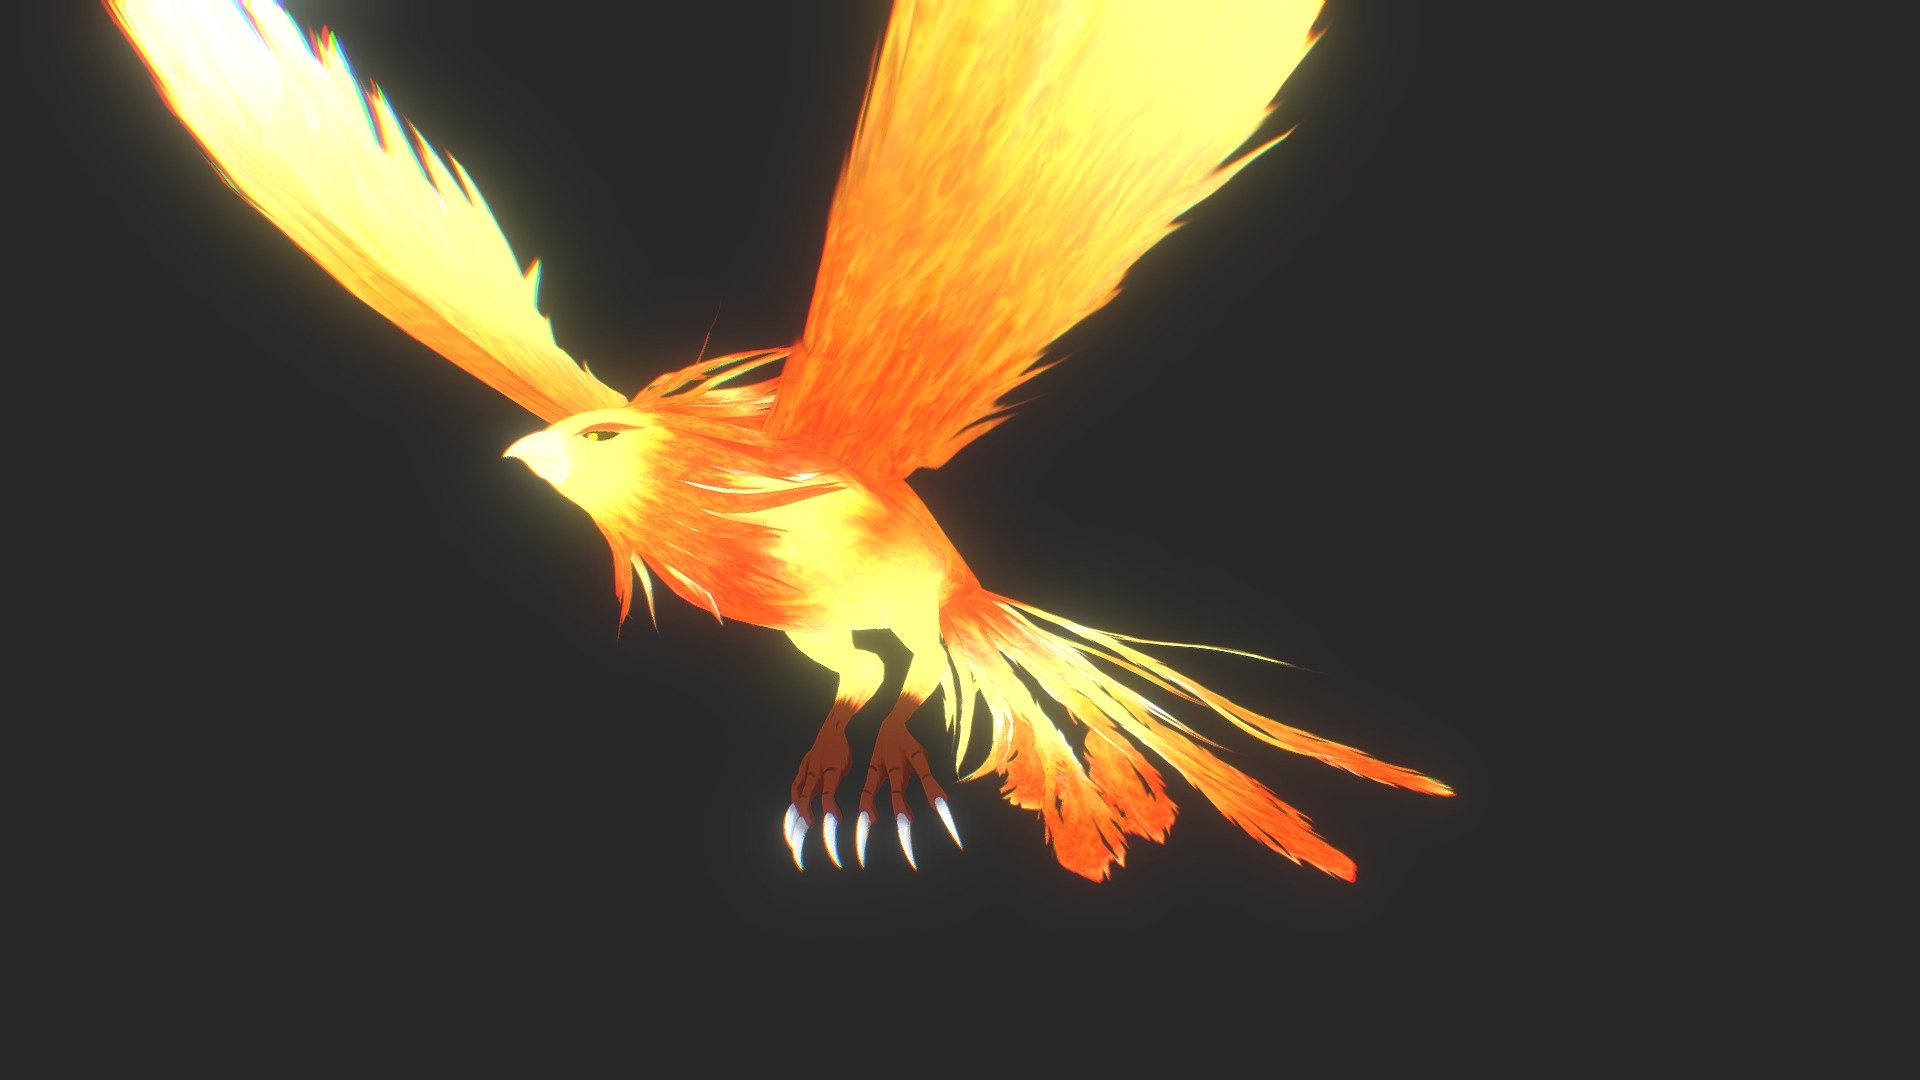 Phoenix




Blender 3.2

3ds max 2018

obj

fbx

quad mesh

1 Material

1 Color Texture .jpeg

**Model without subdivisions **




poly : 2006

vert : 3920

Rigged

A Blender 3.3 file with rig from rigify

VIDEO:

https://youtu.be/puNIXAeOOWo

https://youtu.be/D-yH7l4g4ik - 3D_phoenix_RIGIFY_Animation - Buy Royalty Free 3D model by 3D Figures (@3DFigures) 3d model